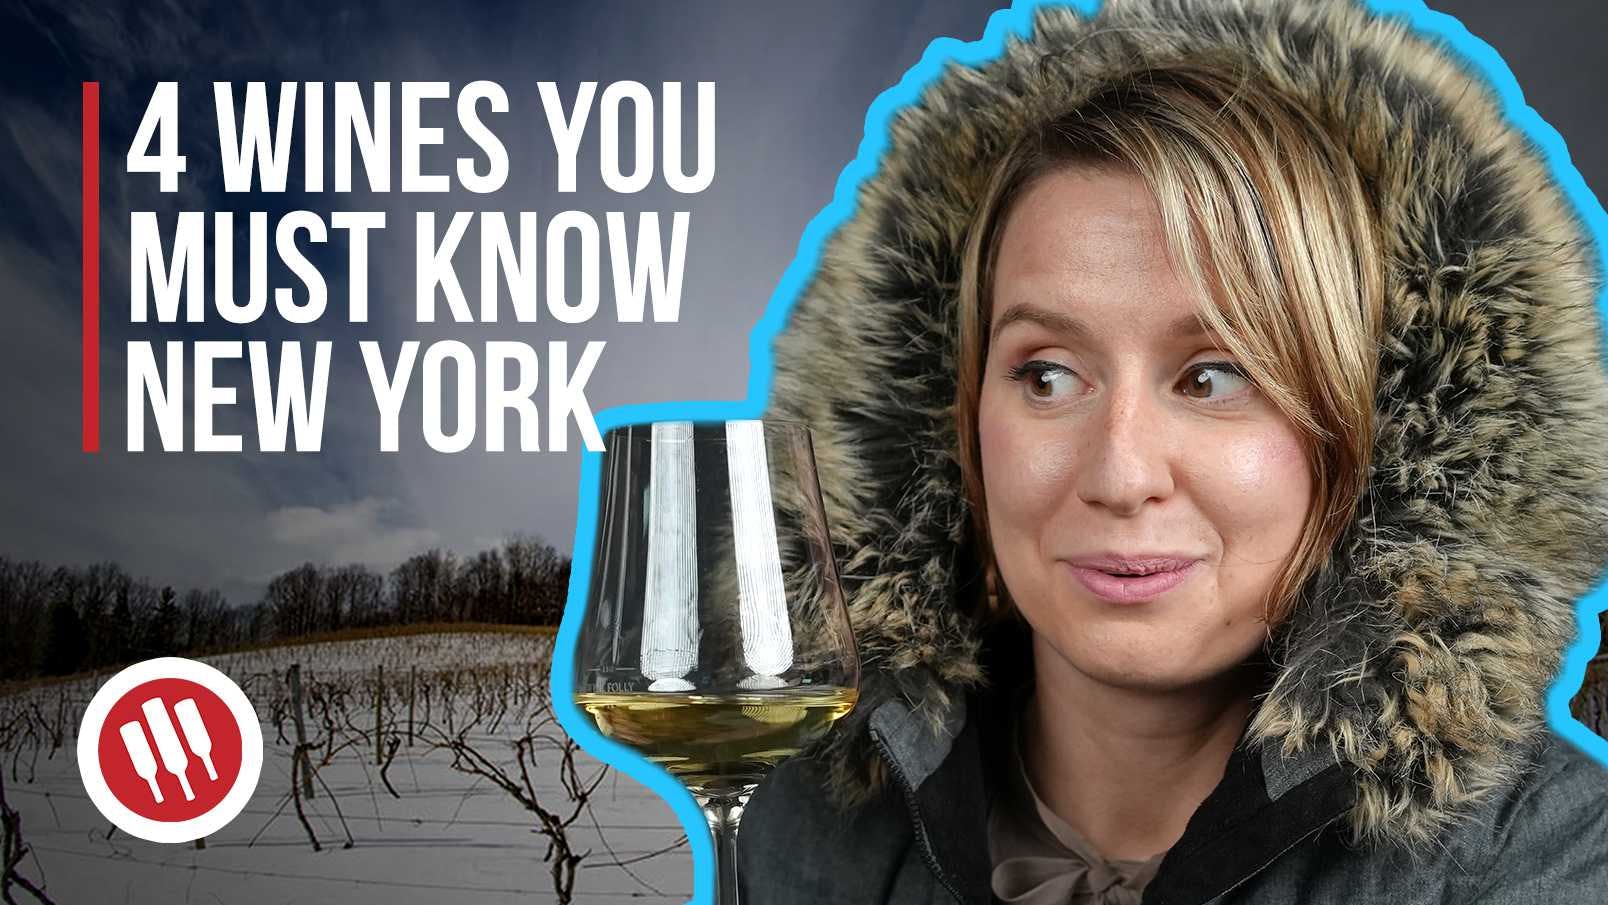 Cover Image for New York Wine Region Guide Released!